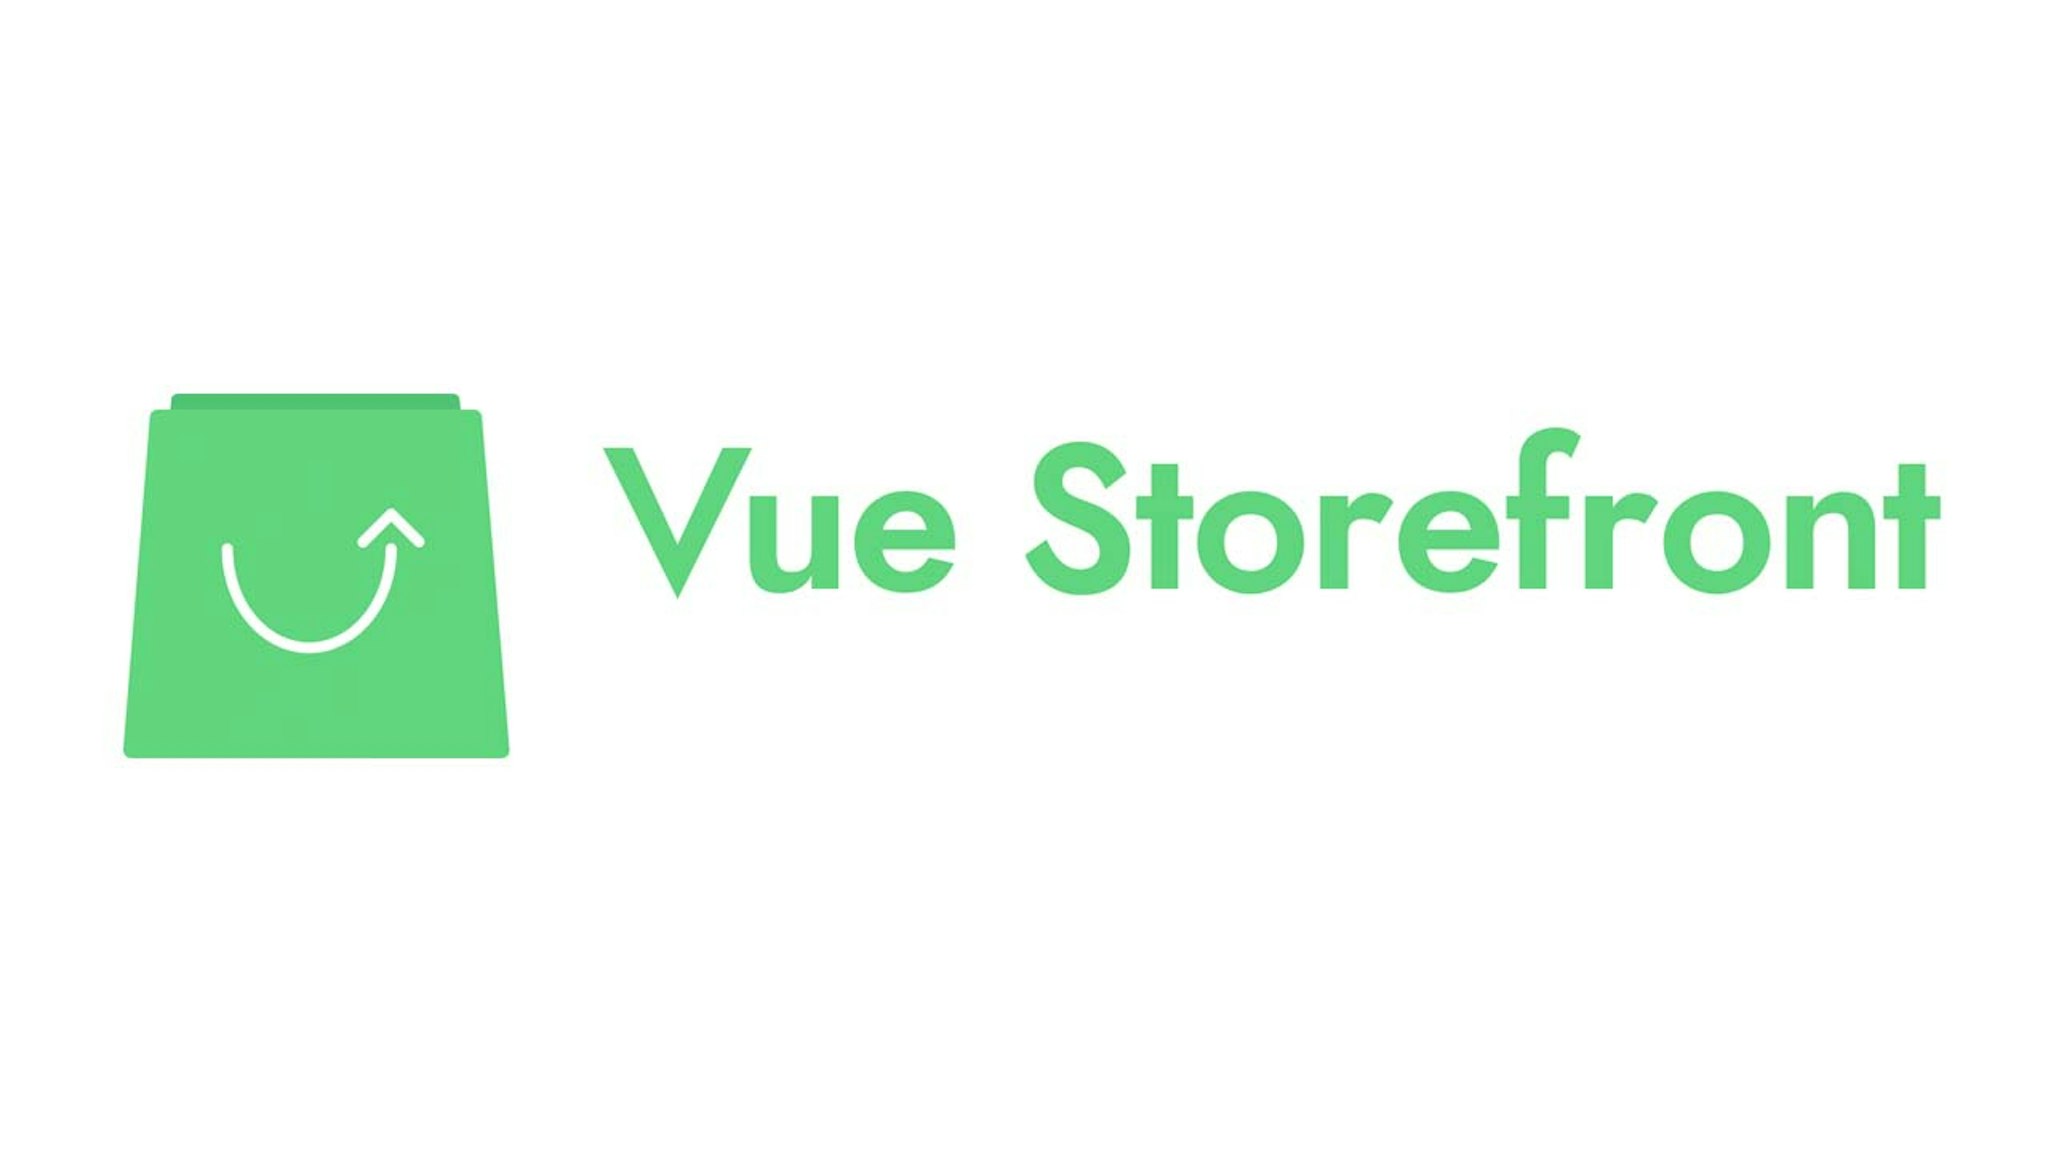 vue storefront logo in a white background